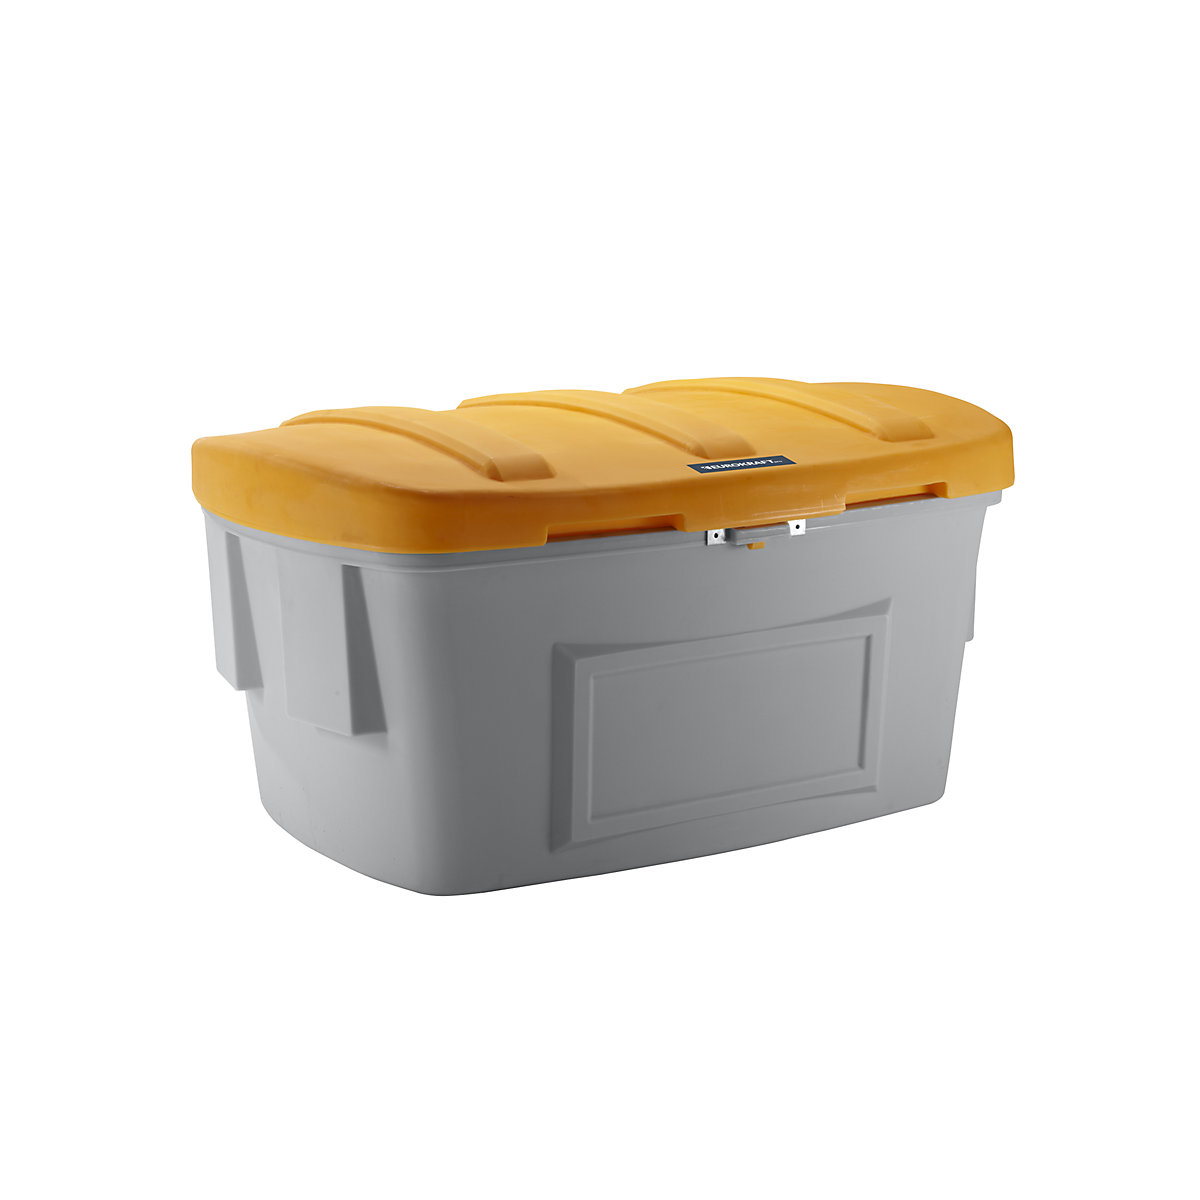 Universal / grit container – eurokraft pro, without dispenser opening, 1000 l, orange lid-4